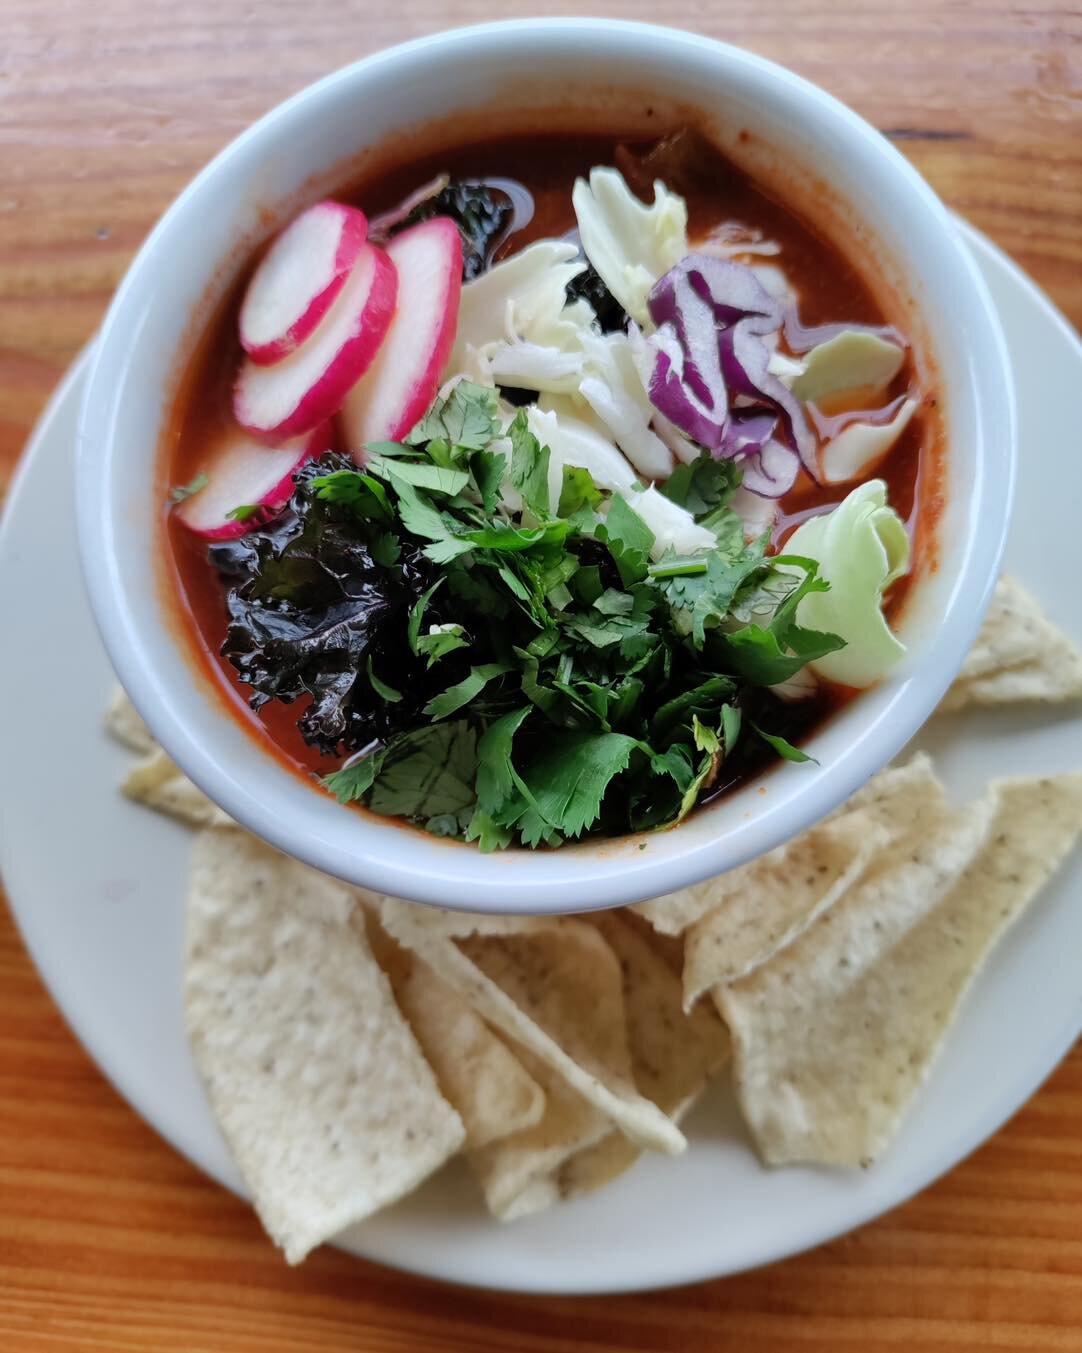 Open till 7pm Mon &amp; Tues #Organic Salad Bowls Fresh Juices Wholefood Smoothies Vegan Pozole with @sietefoods gluten free chips! Soup and More! Order at our walk up window Kiosks to earn discounts 
Order Online www.purekitchenandjuicery.com or del